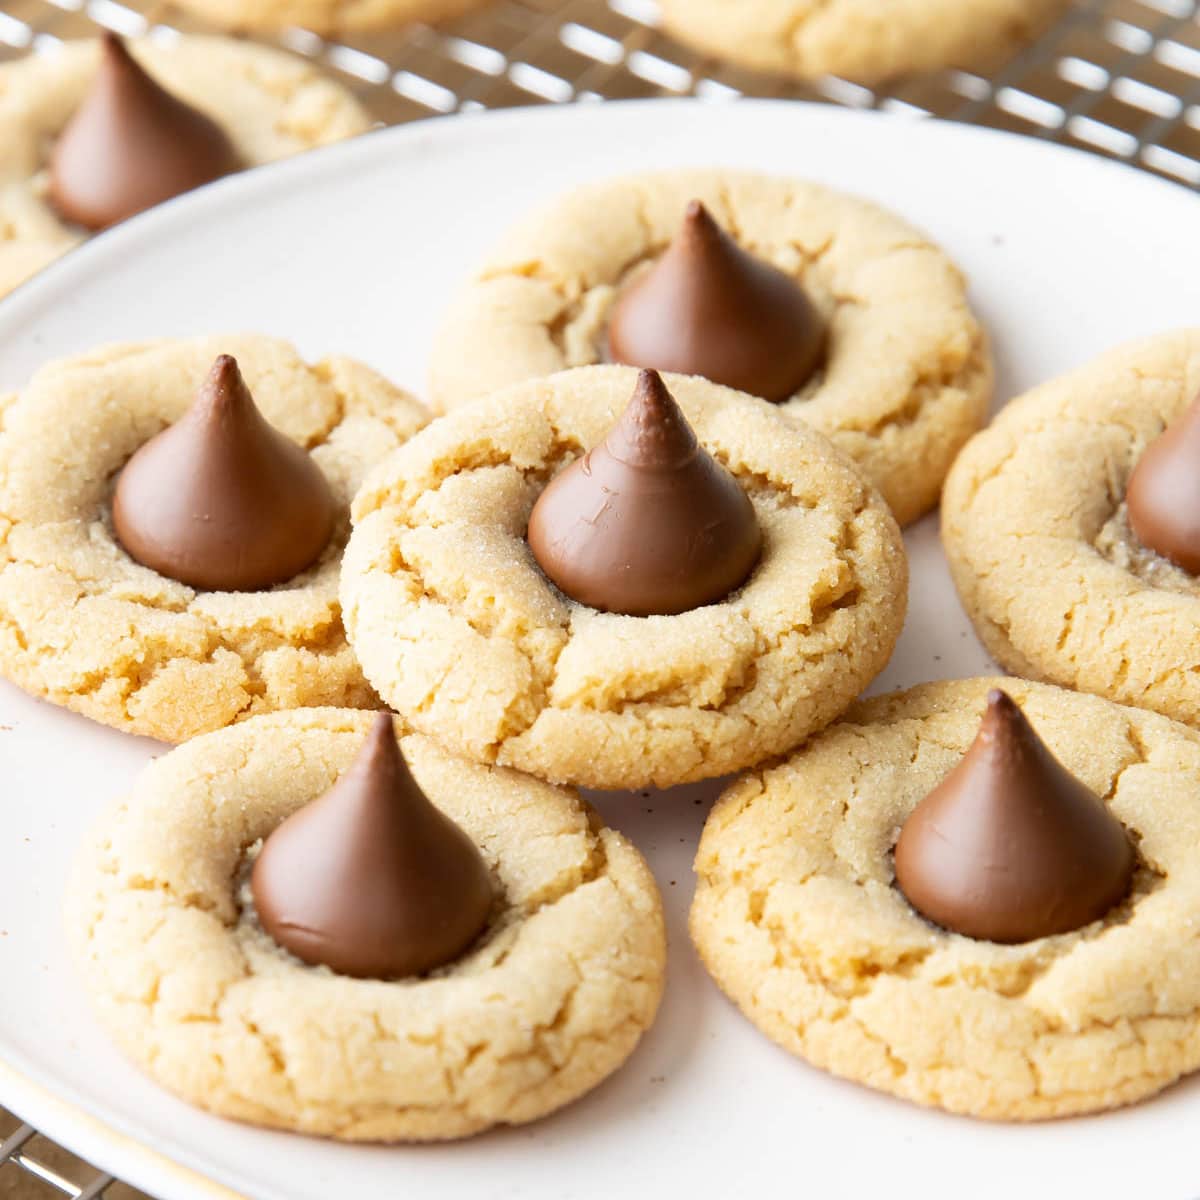 Peanut Butter Blossoms stacked on a plate, ready to serve